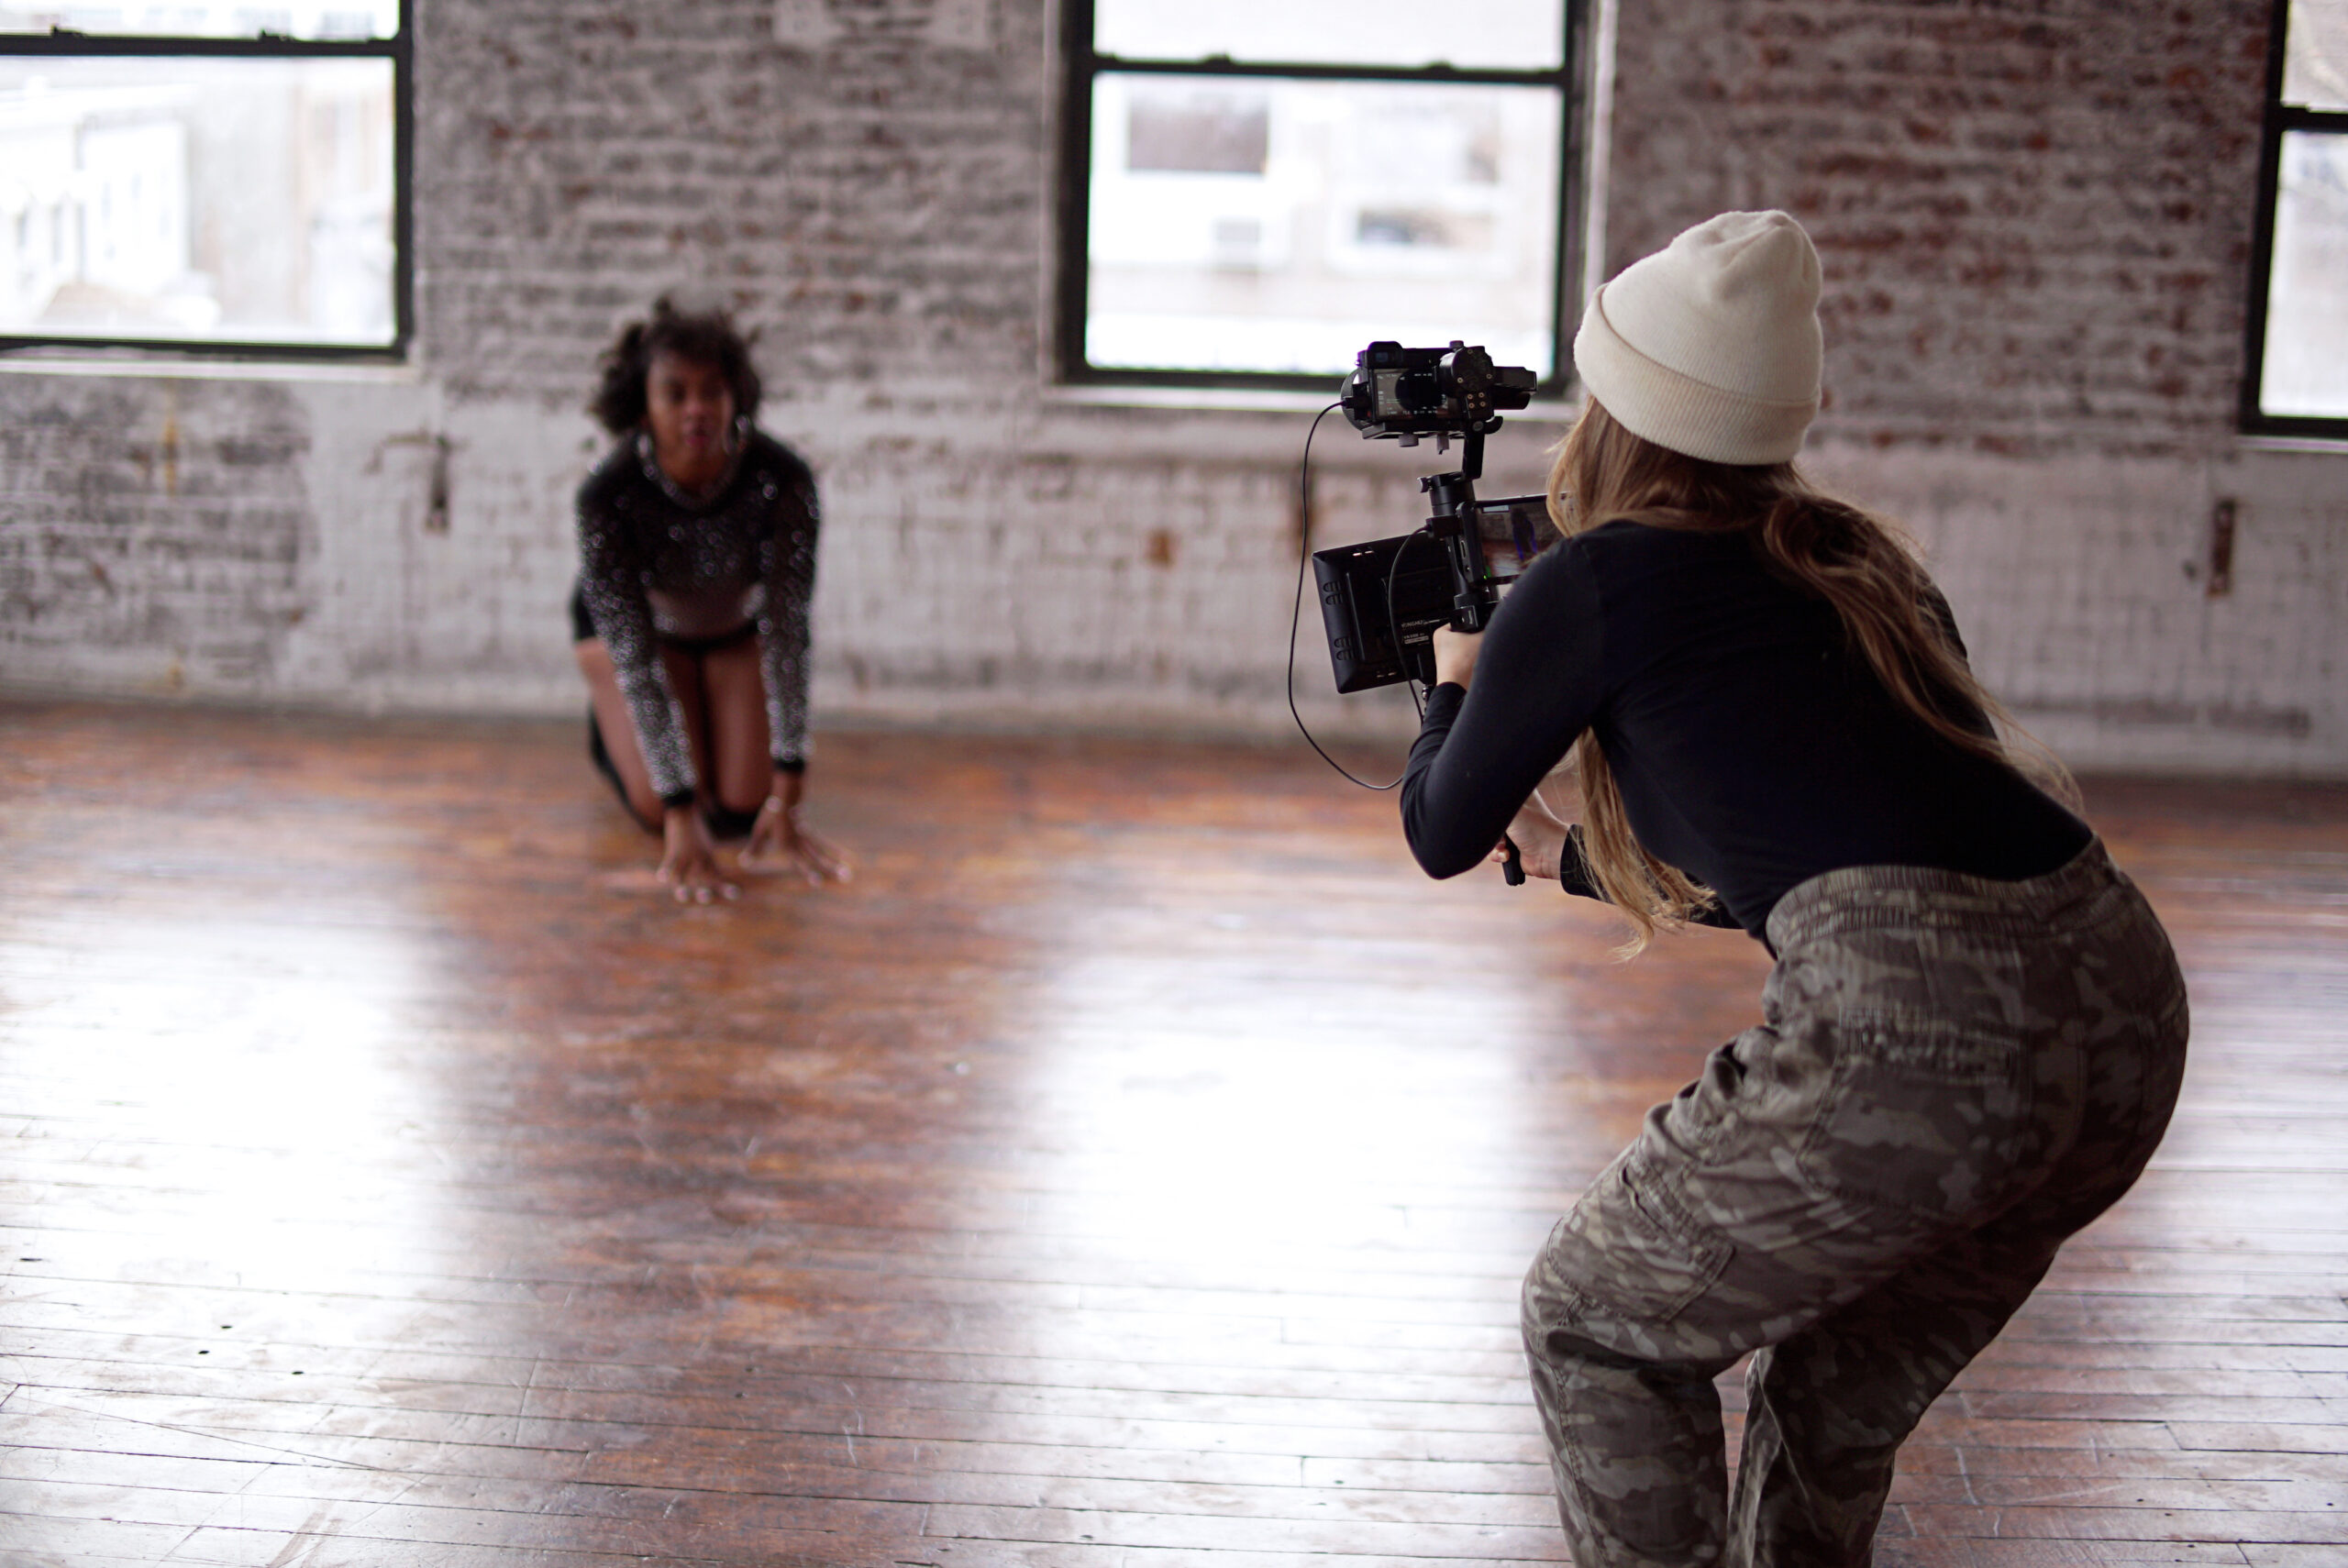 Woman leans over, filming a dancer kneeling on the ground in a brick-lined studio.